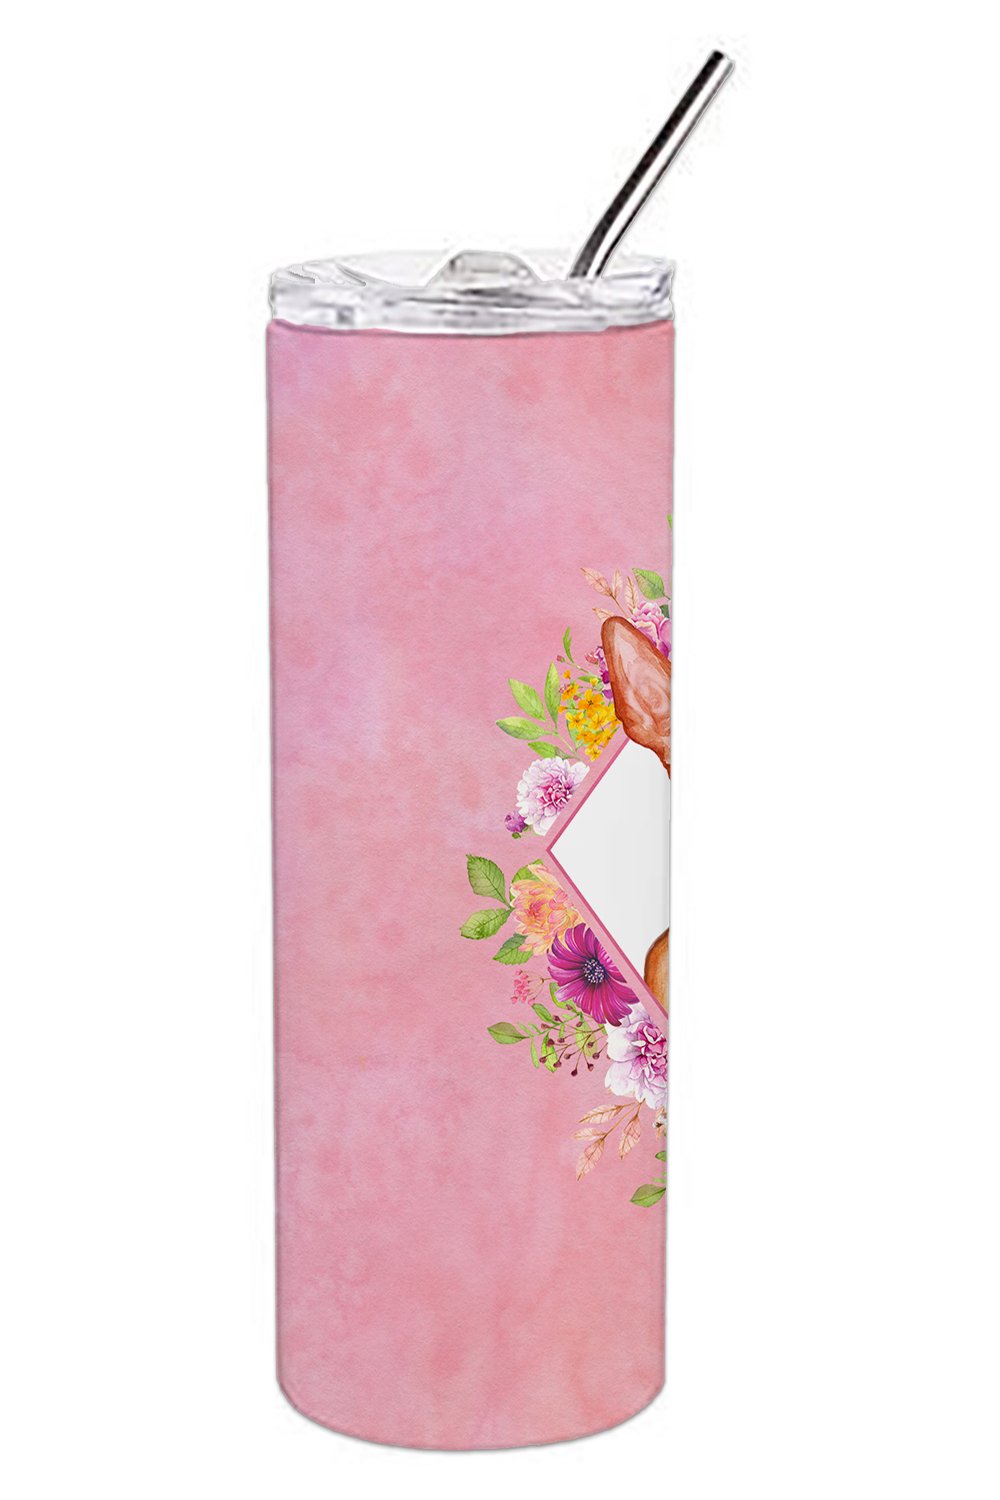 Pharaoh Hound Pink Flowers Double Walled Stainless Steel 20 oz Skinny Tumbler CK4168TBL20 by Caroline's Treasures